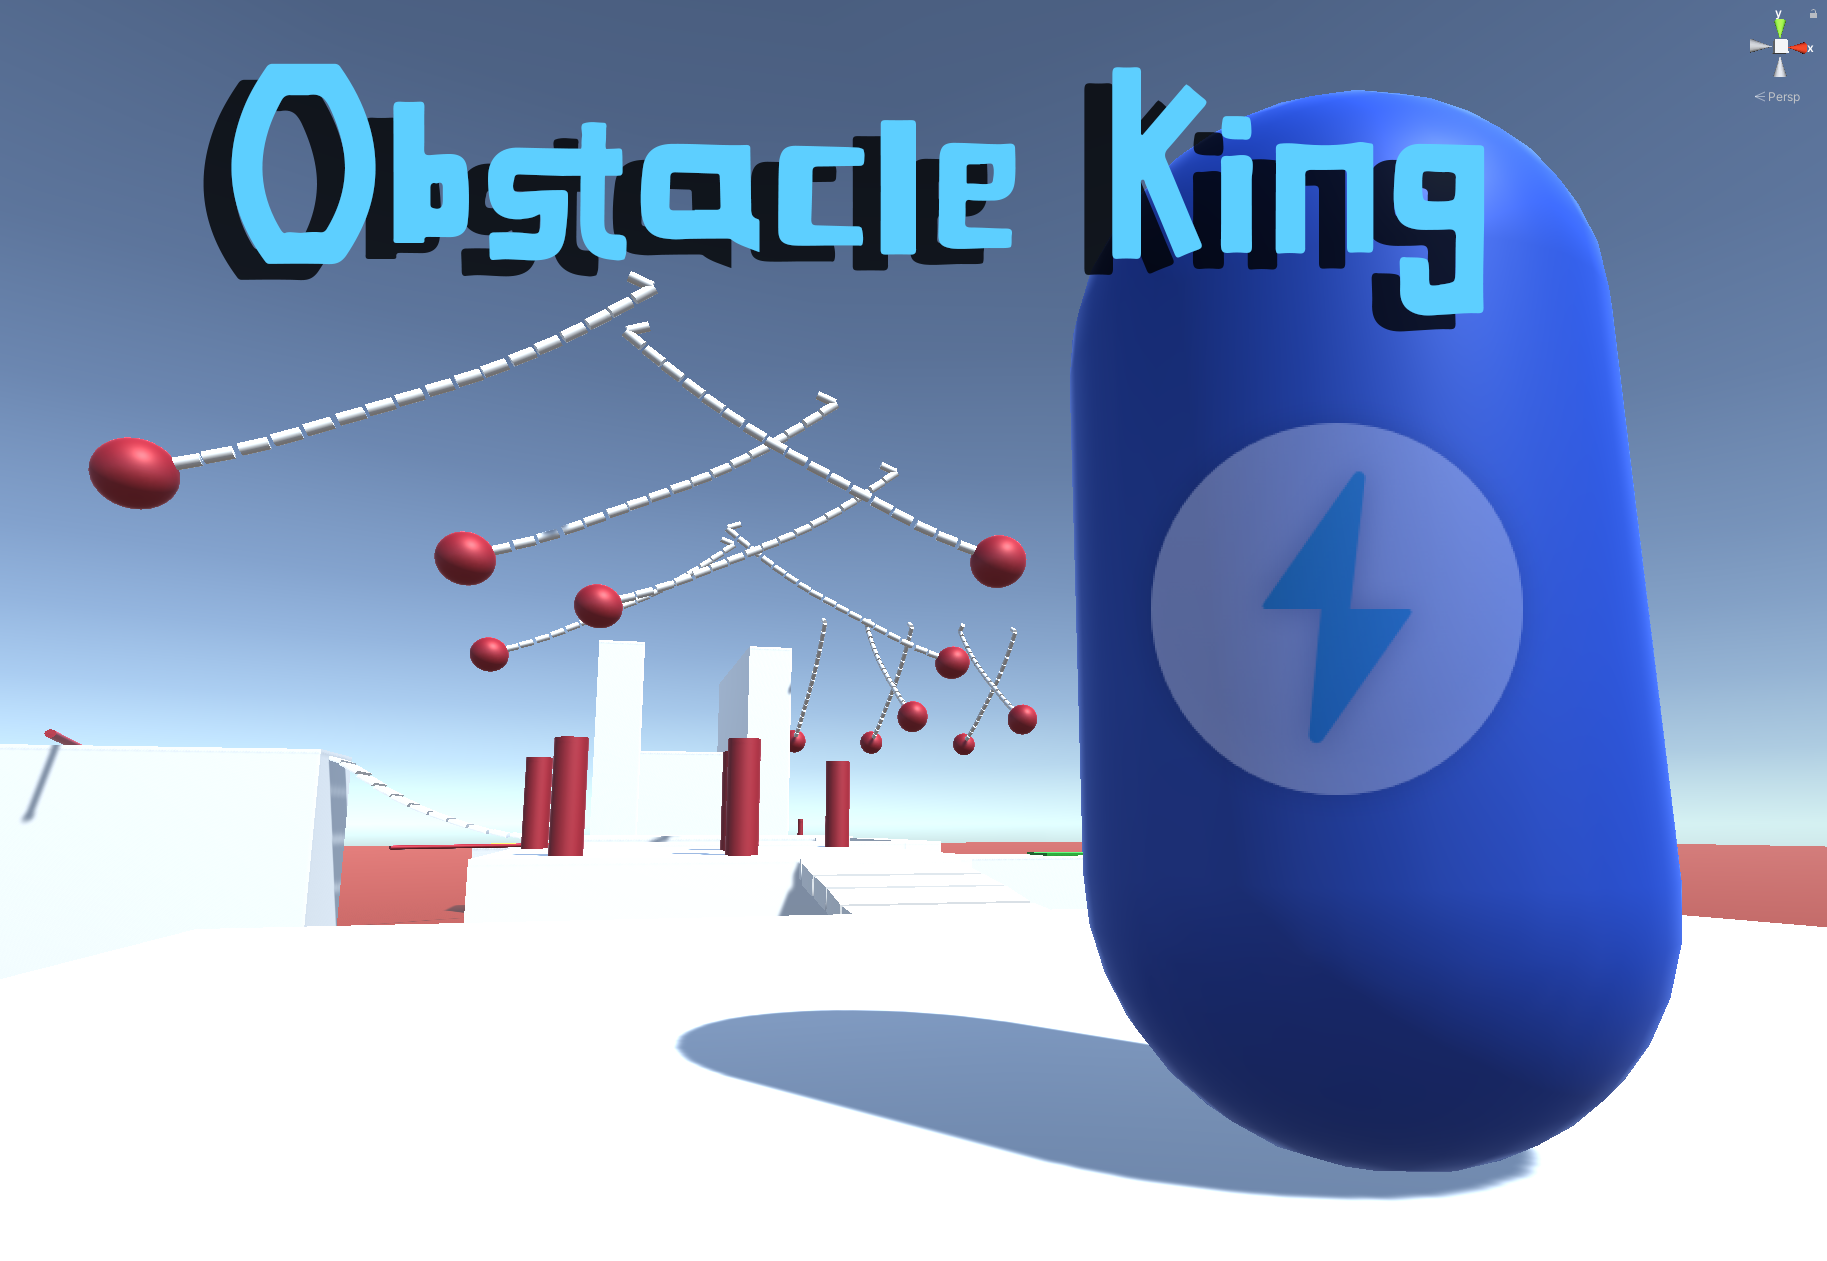 Obstacle king